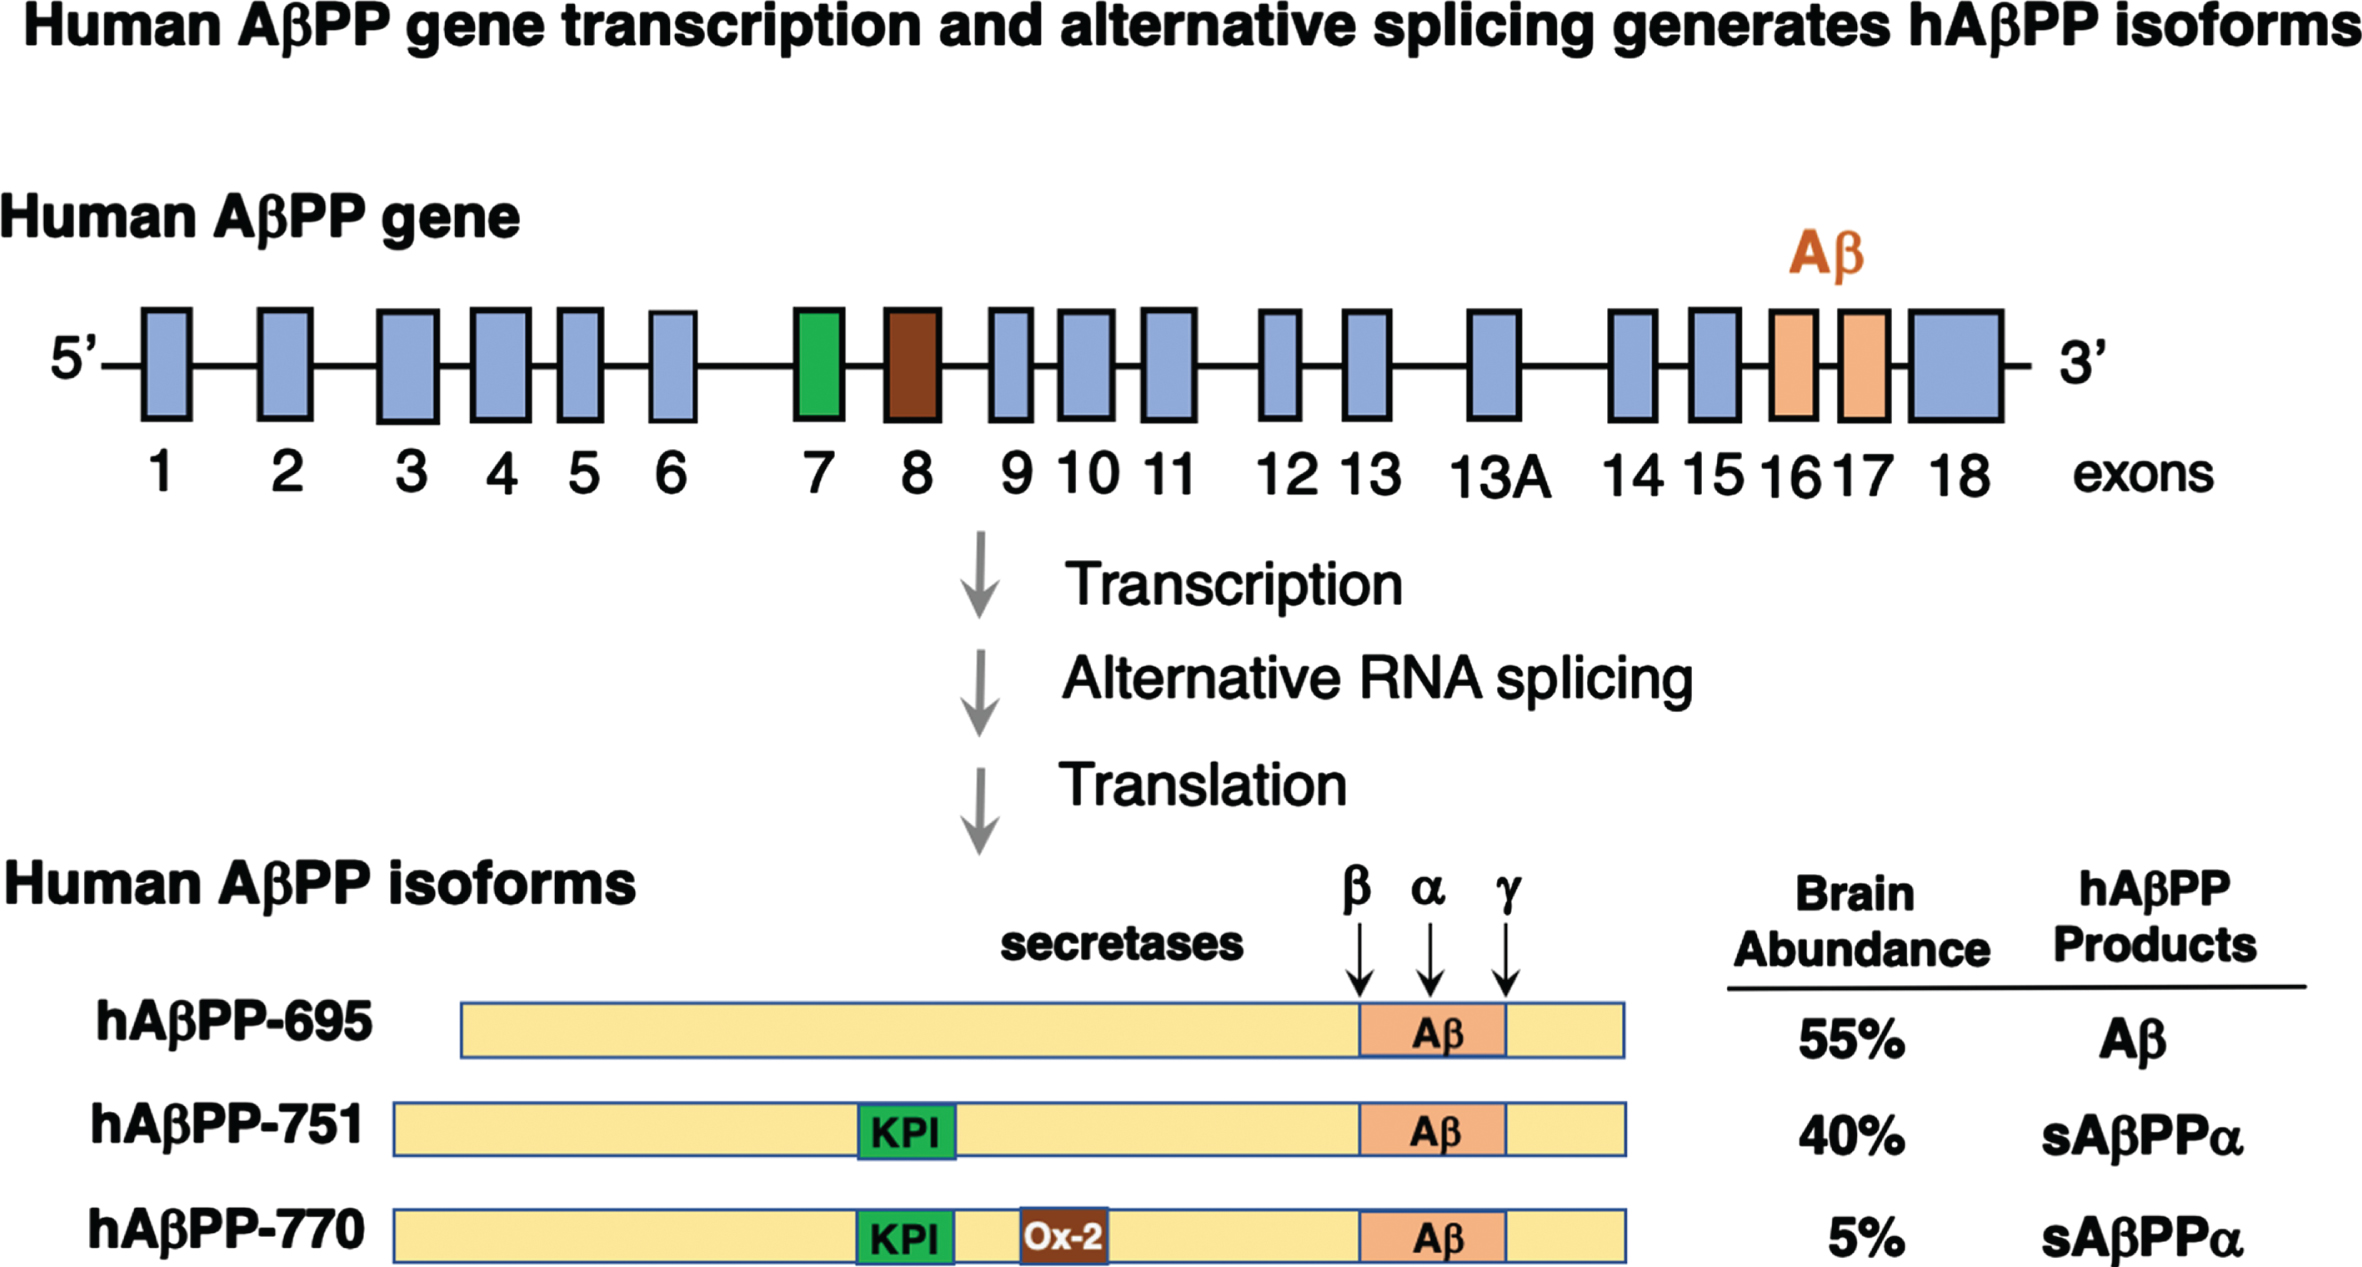 Human AβPP gene transcription and alternative splicing generates AβPP isoforms. The hAβPP gene structure consists of 18 exons with introns [23]. The Aβ, KPI (kunitz protease inhibitor), and Ox-2 domains are encoded by exons 16-17, exon 7, and exon 8, respectively. Alternative RNA splicing of the gene transcript generates three main hAβPP isoforms of hAβPP-695, hAβPP-751, and hAβPP-770 that all contain the Aβ domain. The hAβPP-751 and hAβPP-770 isoforms contain the KPI domain. The hAβPP-770 isoform includes the Ox-2 domain. In brain, hAβPP-695 is the most abundant isoform and is present in neurons for production of amyloidogenic Aβ by β-secretase and γ-secretase [22–24]. The hAβPP-751 and hAβPP-770 isoforms are present at low levels in brain [21, 23–26], and are converted to non-amyloidogenic sAβPPαby α-secretase cleavage [27, 38].